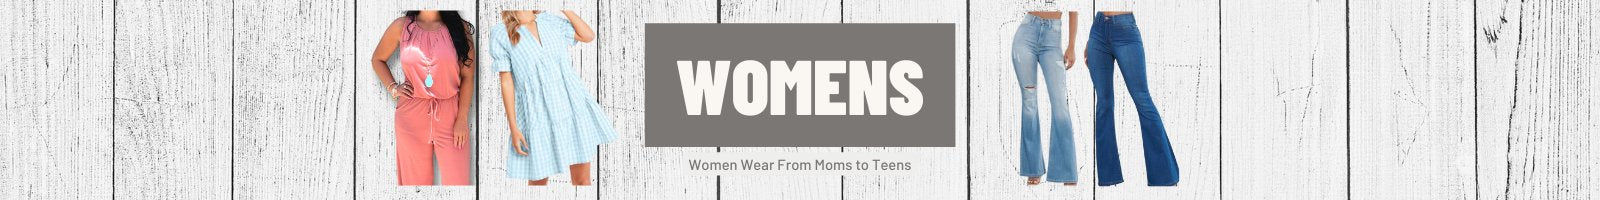 Womens Collection Banner, Women Wear From Moms To Teens